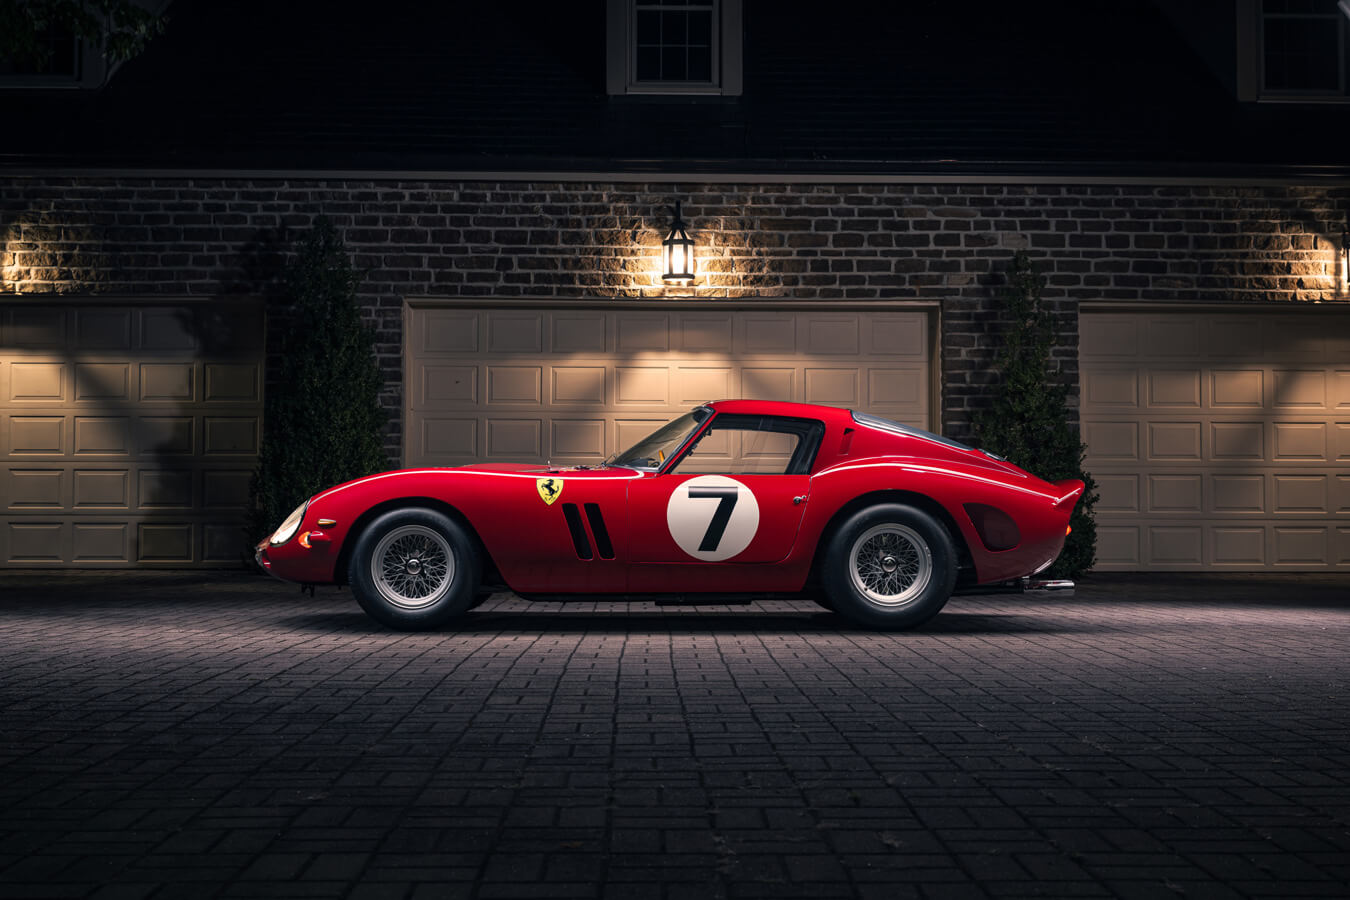 Going, Going – GONE! Ferrari GTO Sets New Auction World Record in $81m Sale